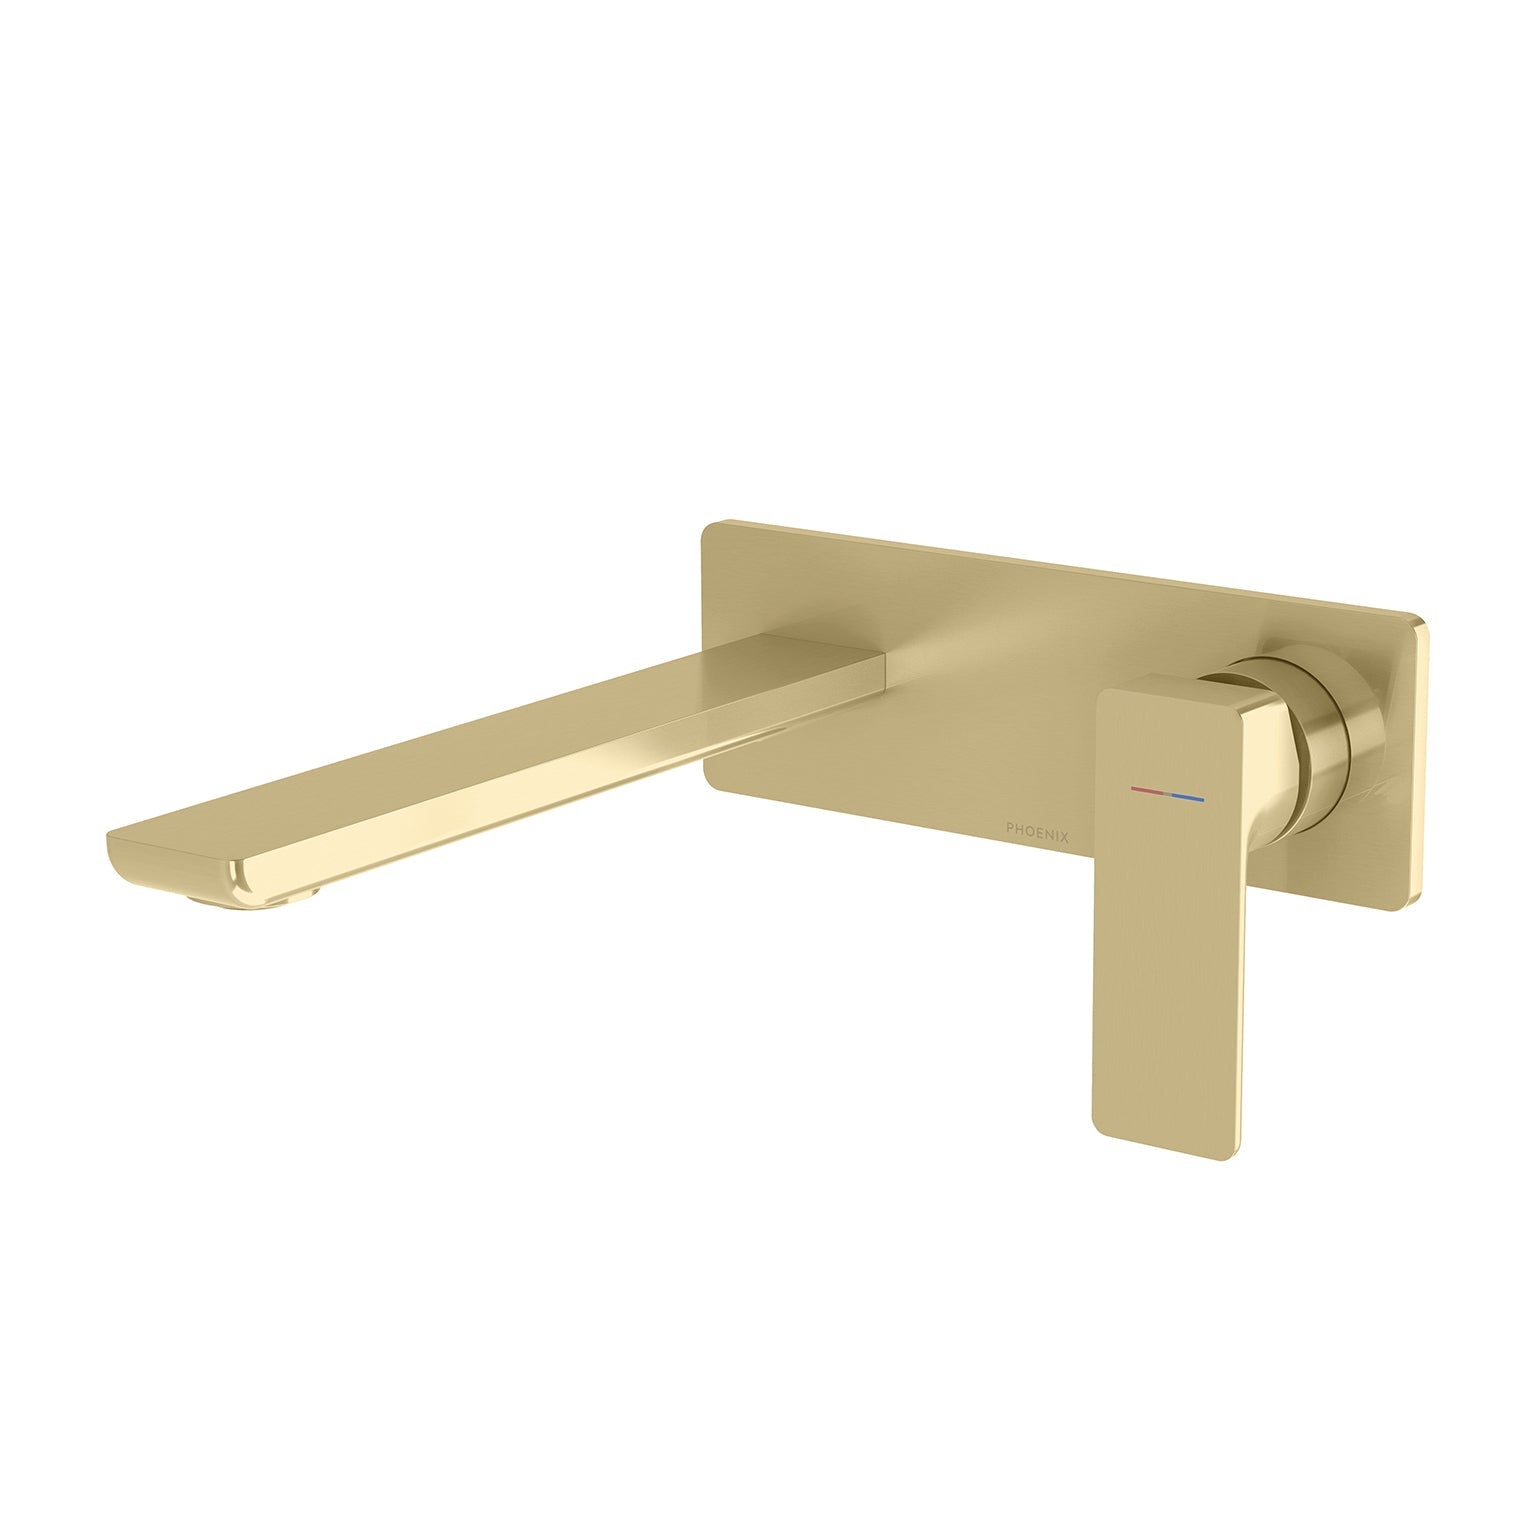 PHOENIX GLOSS MKII SWITCHMIX WALL BASIN / BATH MIXER SET FIT-OFF AND ROUGH-IN KIT BRUSHED GOLD